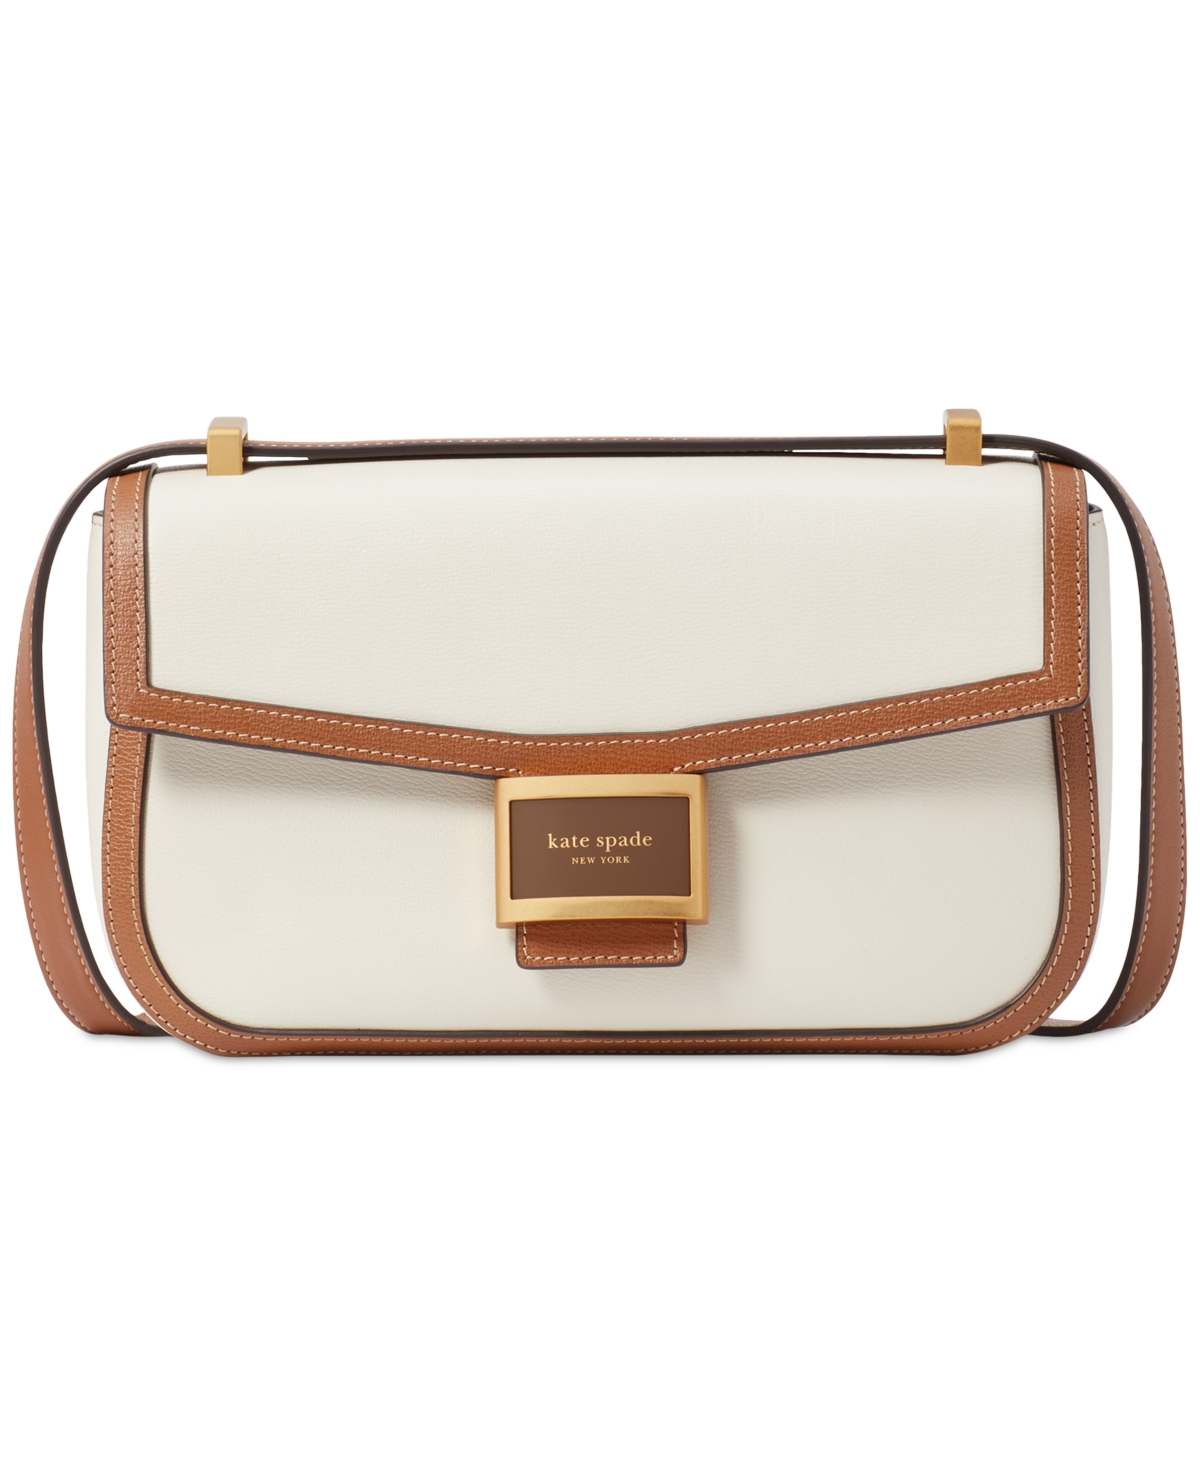 Shop Kate Spade Katy Small Colorblocked Textured Leather Convertible Shoulder Bag In Halo White